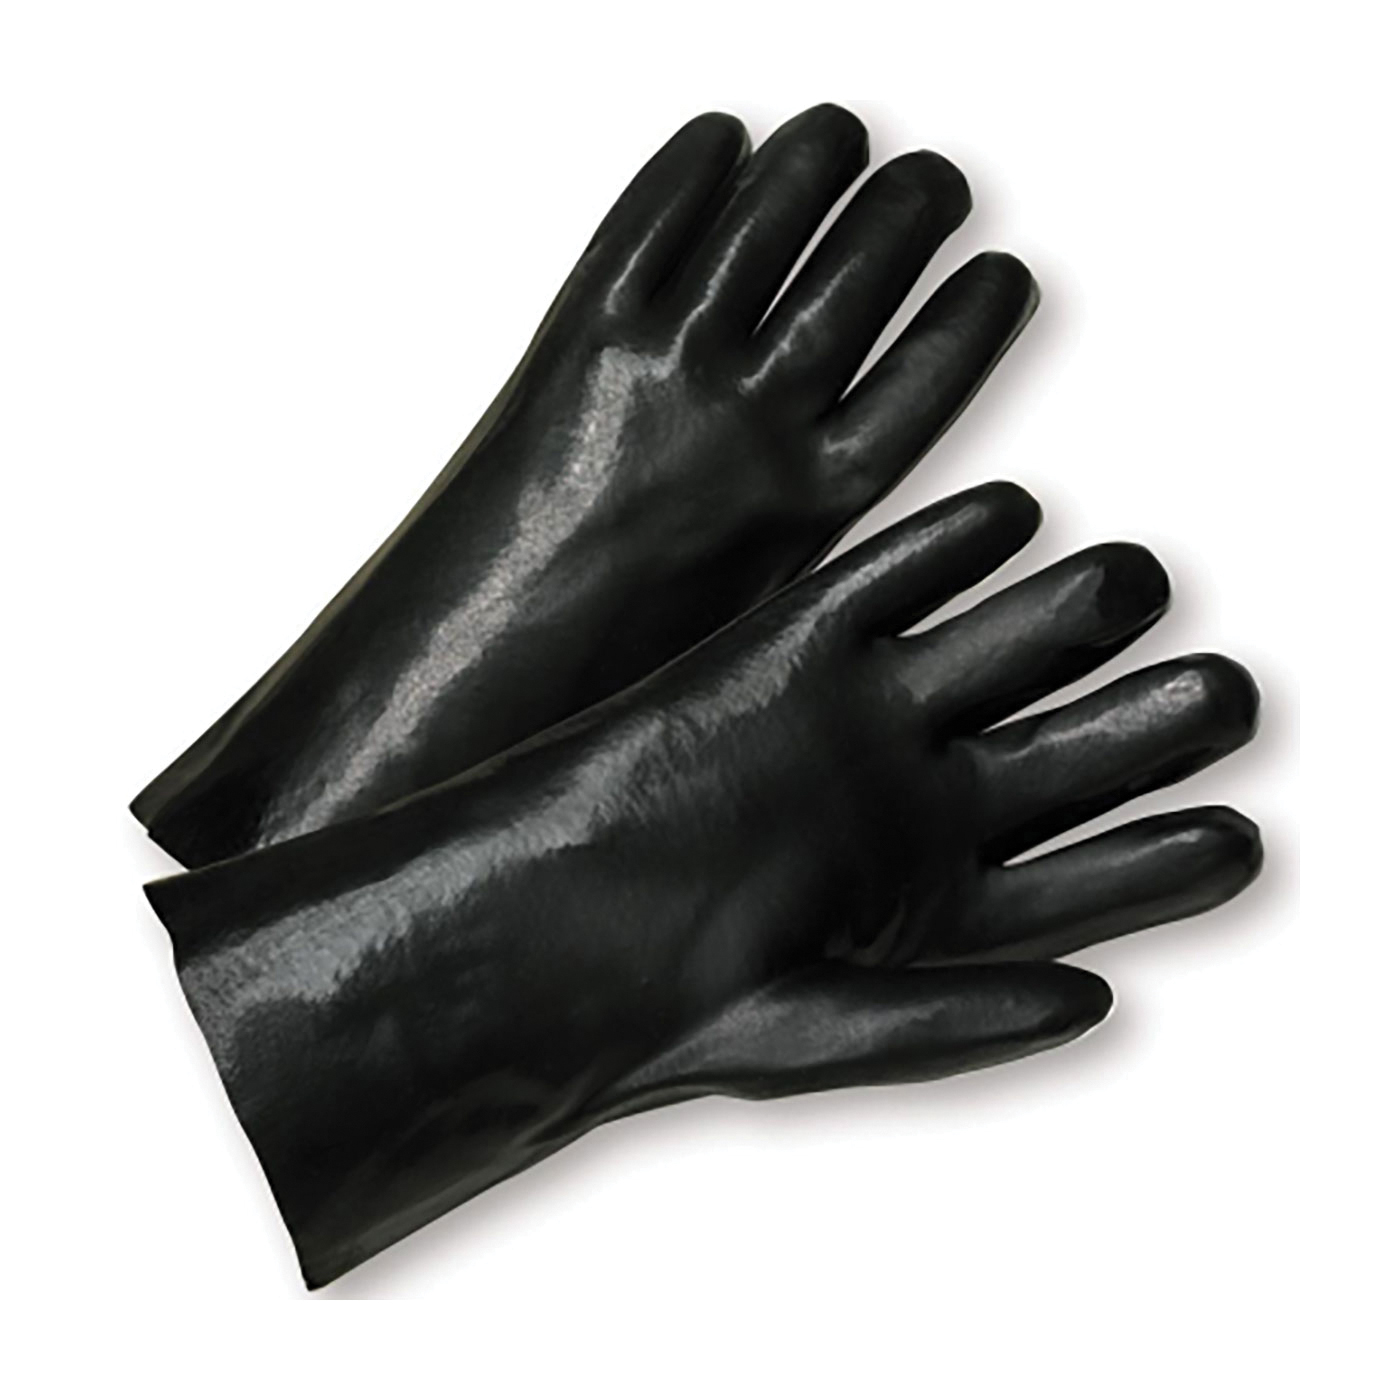 PIP® 1087 Standard Chemical-Resistant Gloves, L, Pair Hand, Black, Cotton Interlock Knit Lining, 18 in L, Resists: Abrasion, Acid, Chemical, Grease, Oil, Water and Solvent, Supported Support, Gauntlet Cuff